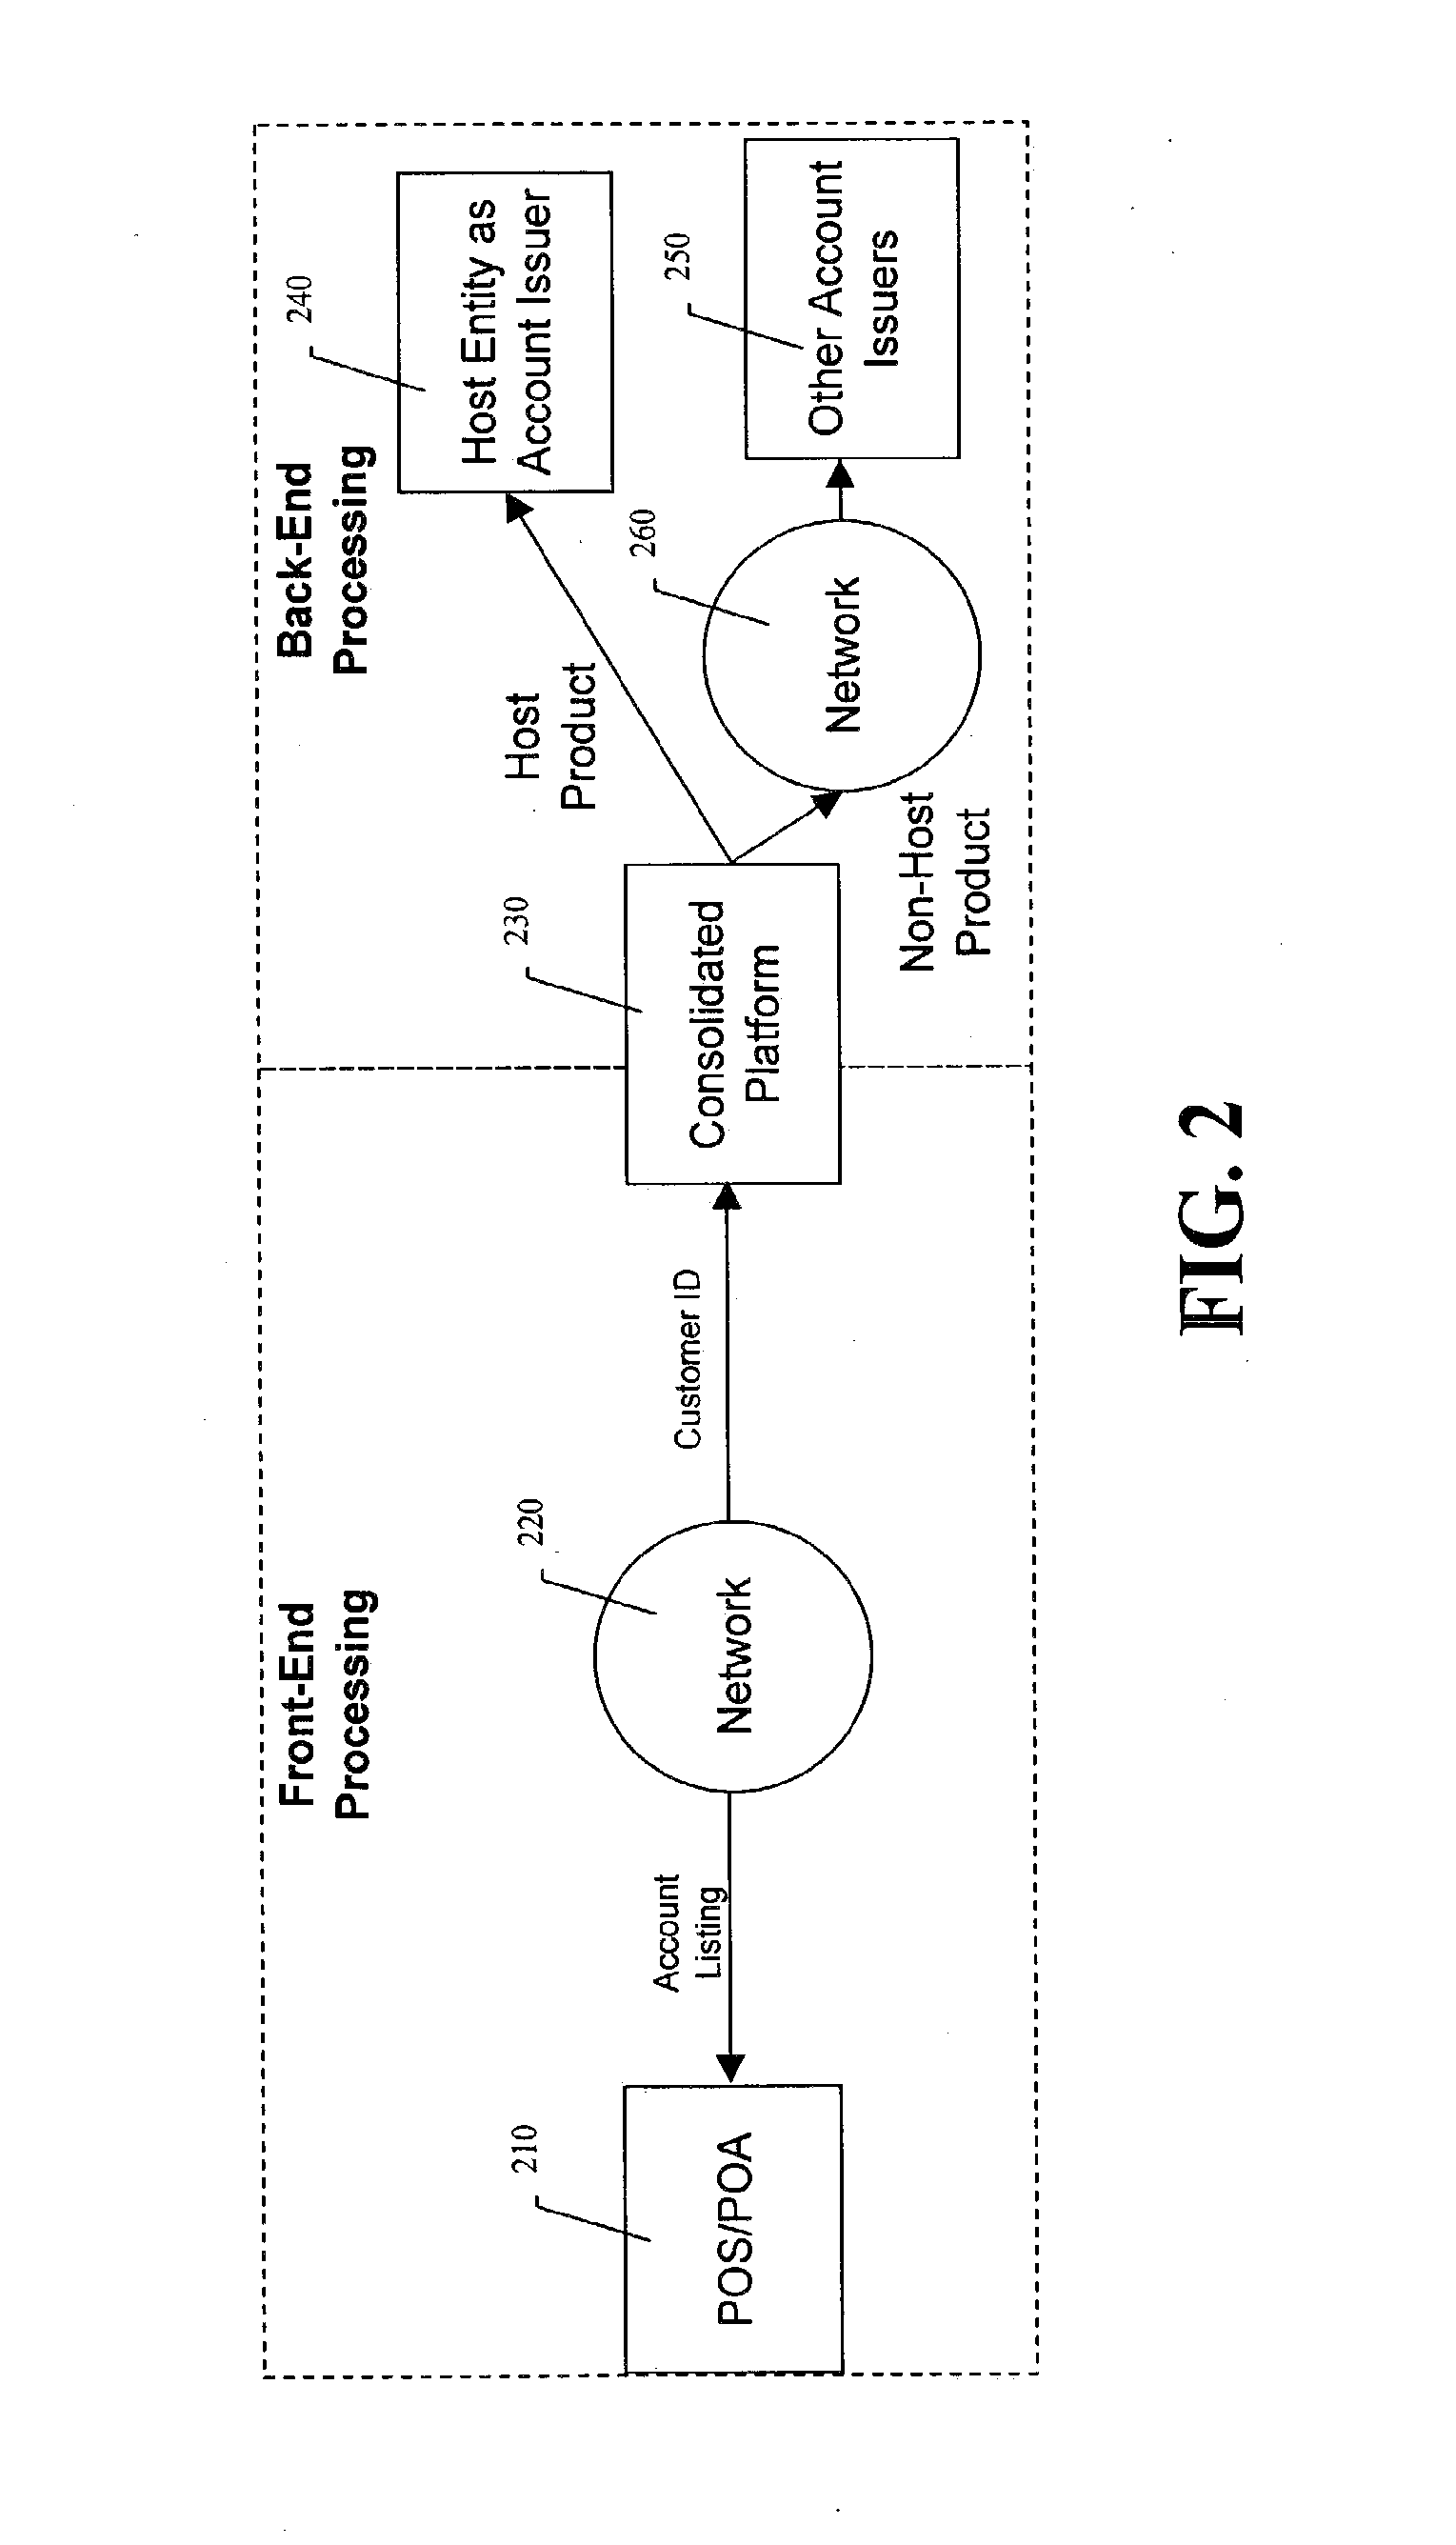 Method and System for a Multi-Purpose Transactional Platform